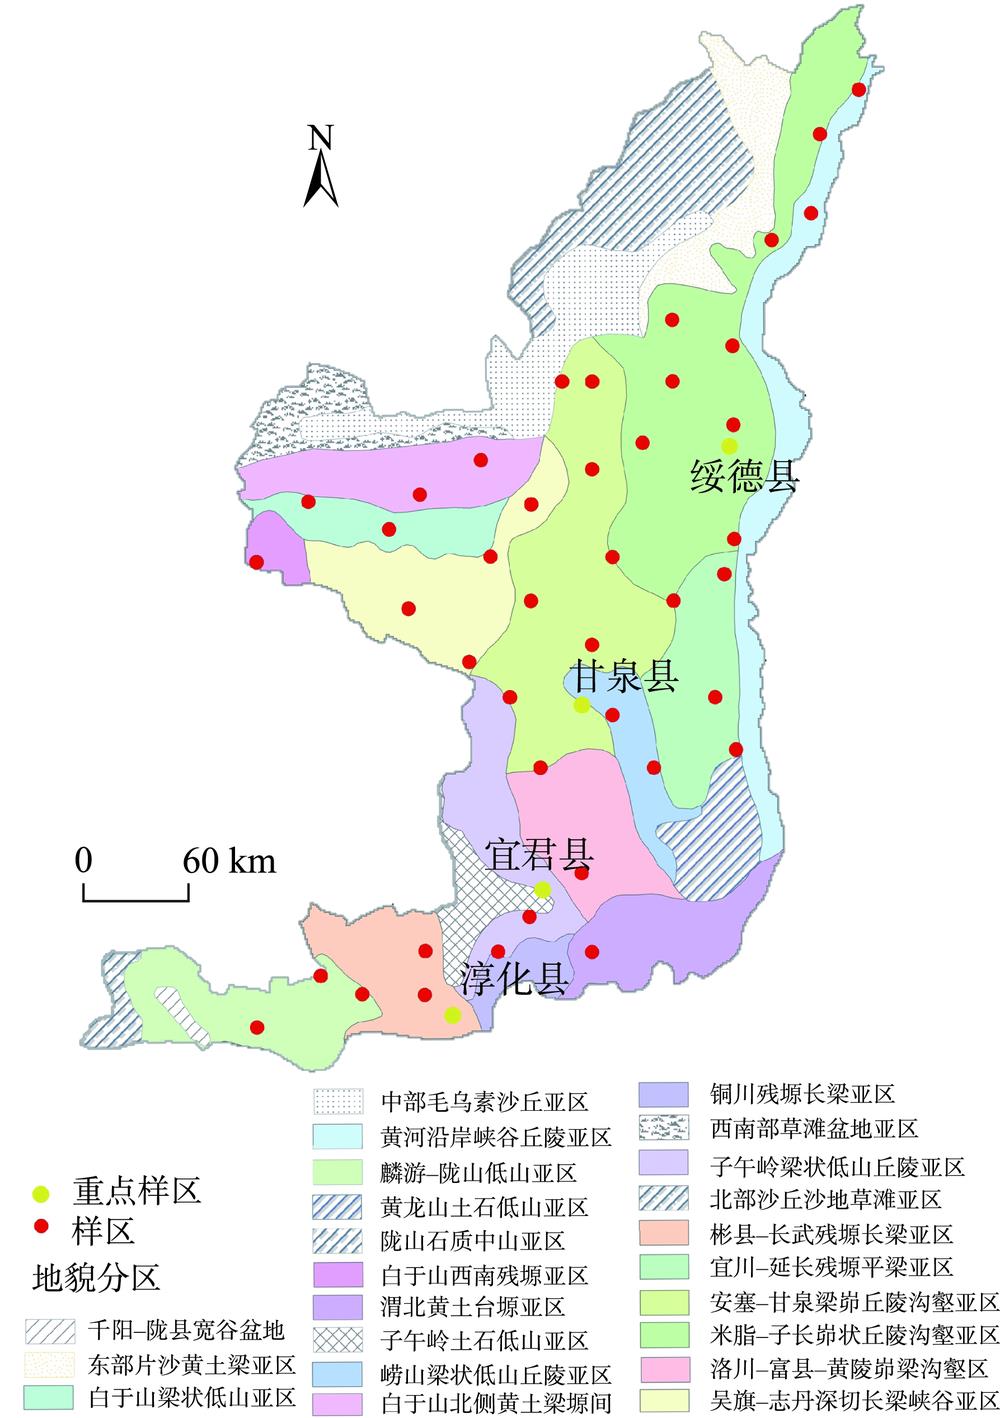 Location of 42 study areas in the Loess Plateau of northern Shaanxi